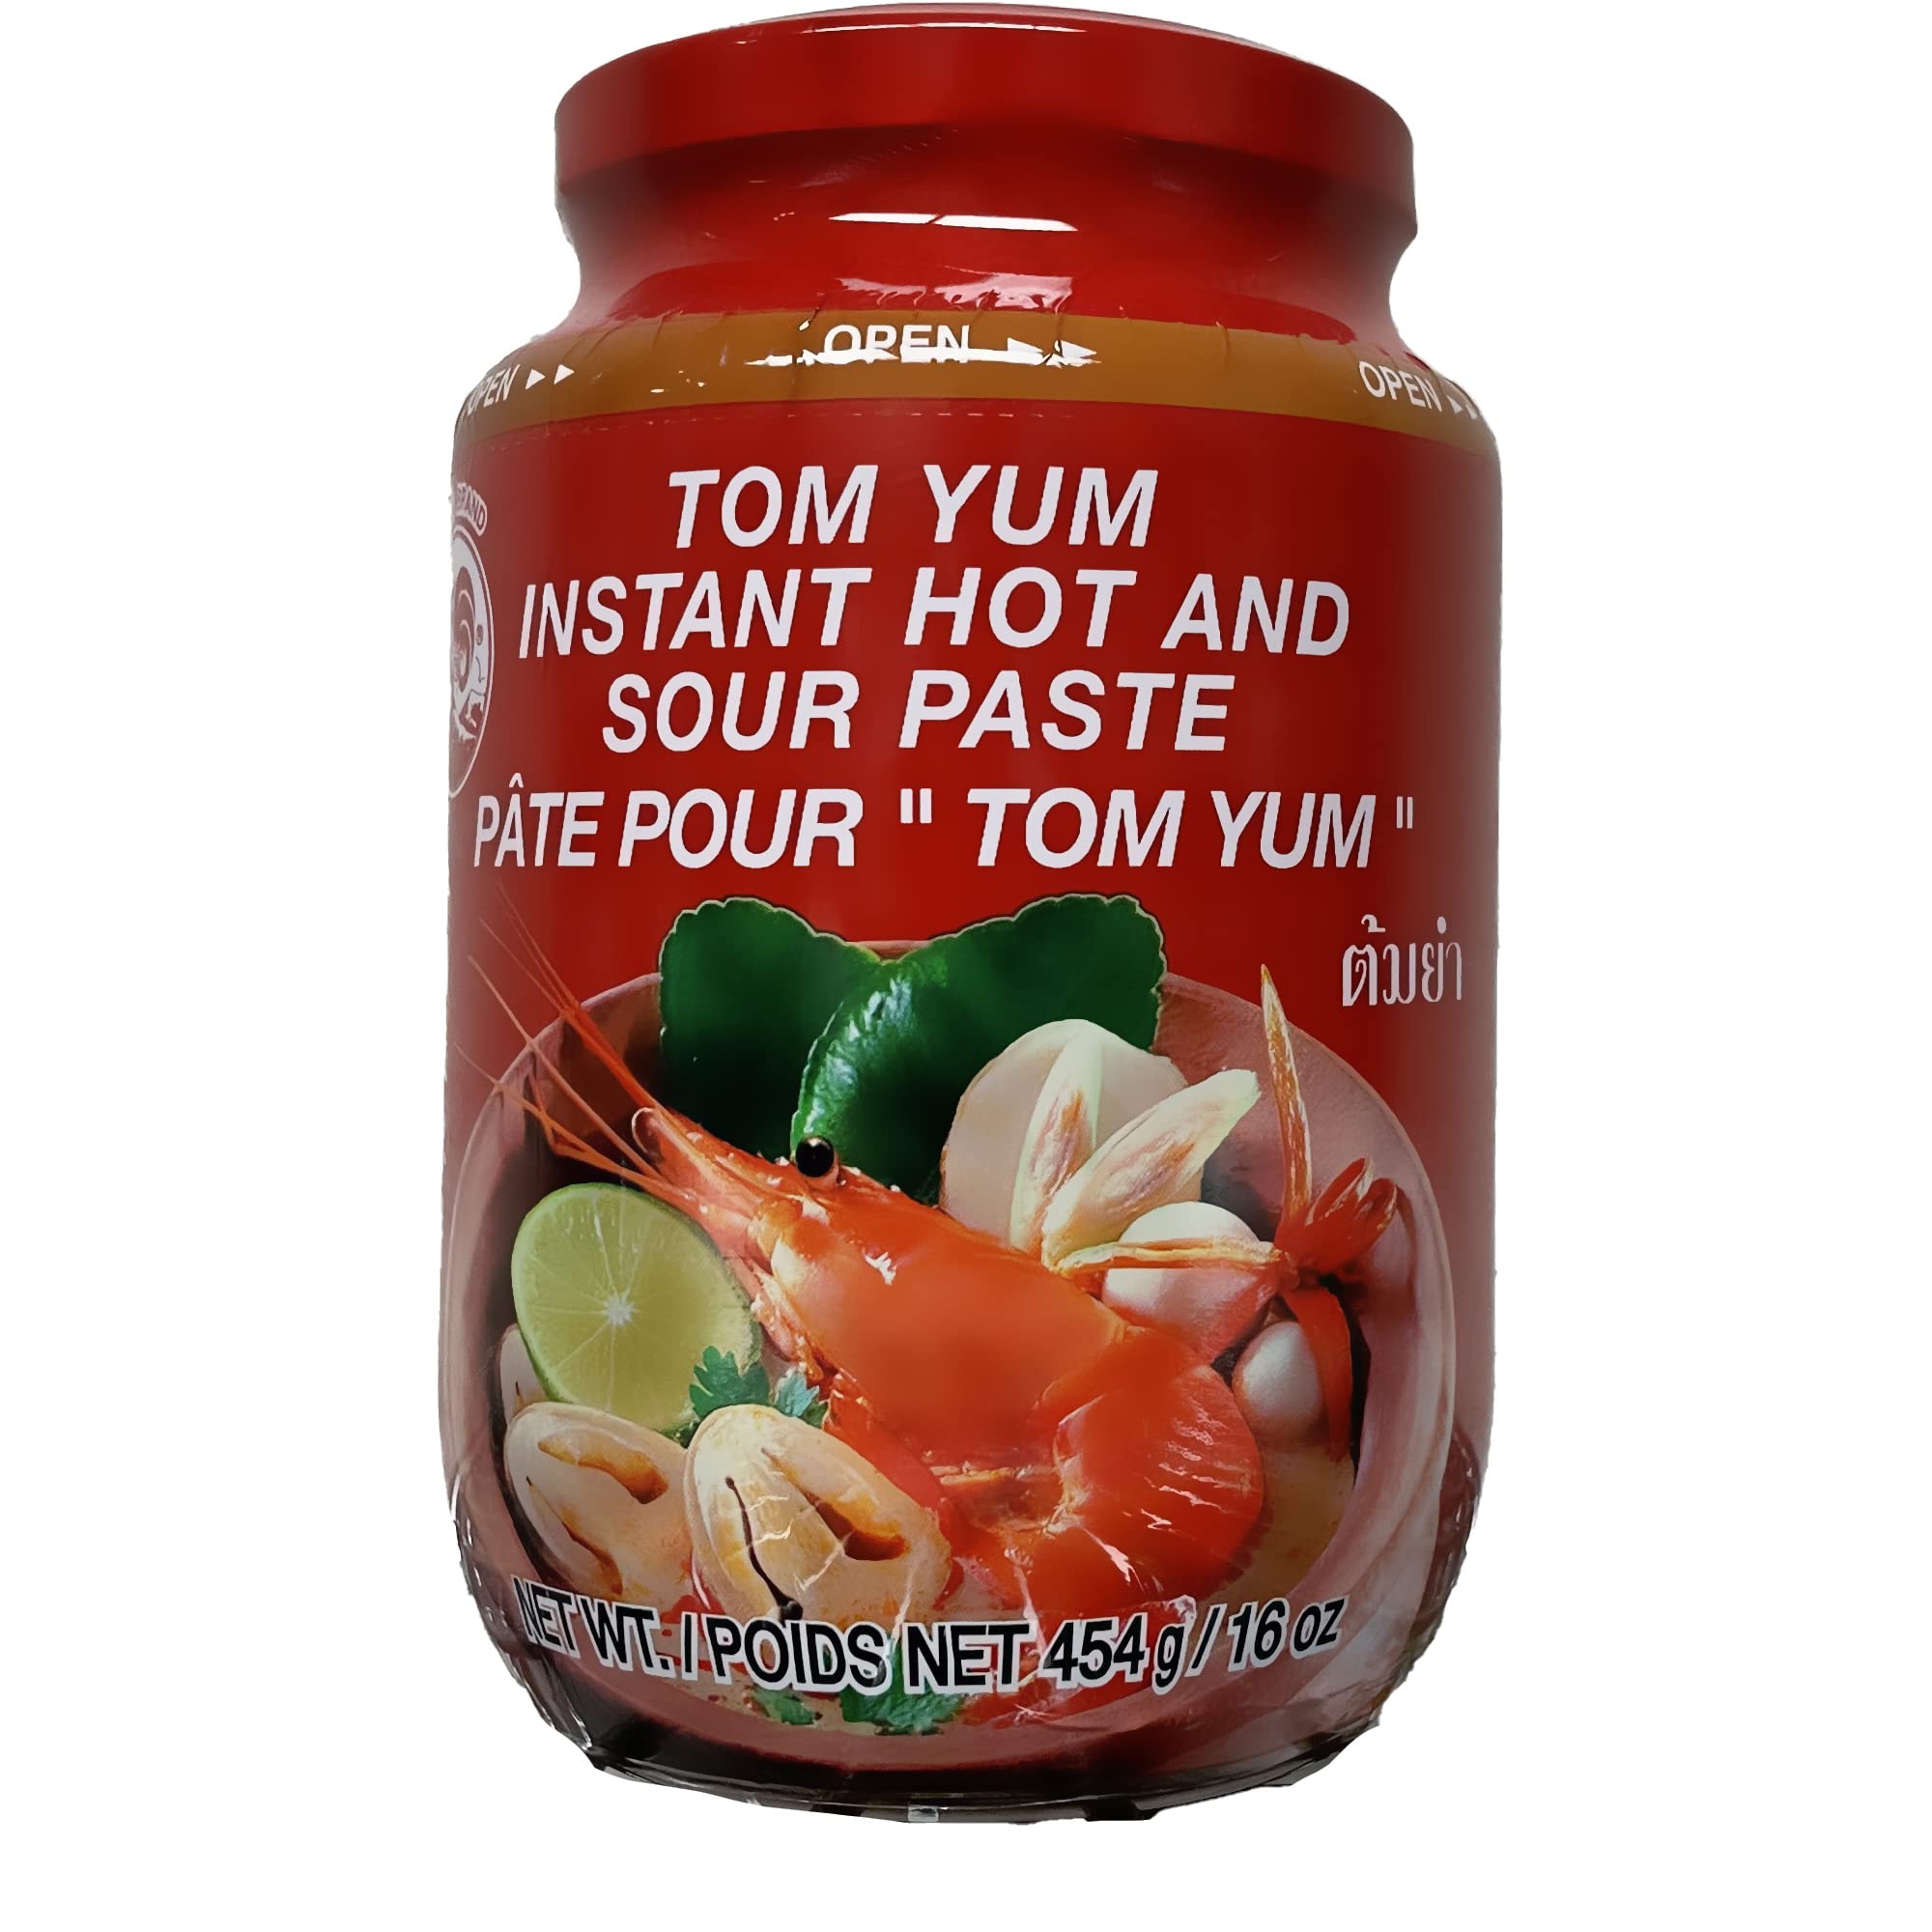 [Pack of 1] Cock Brand Tom Yum Instant Hot & Sour Soup Past, Large Jar - 16 Ounce